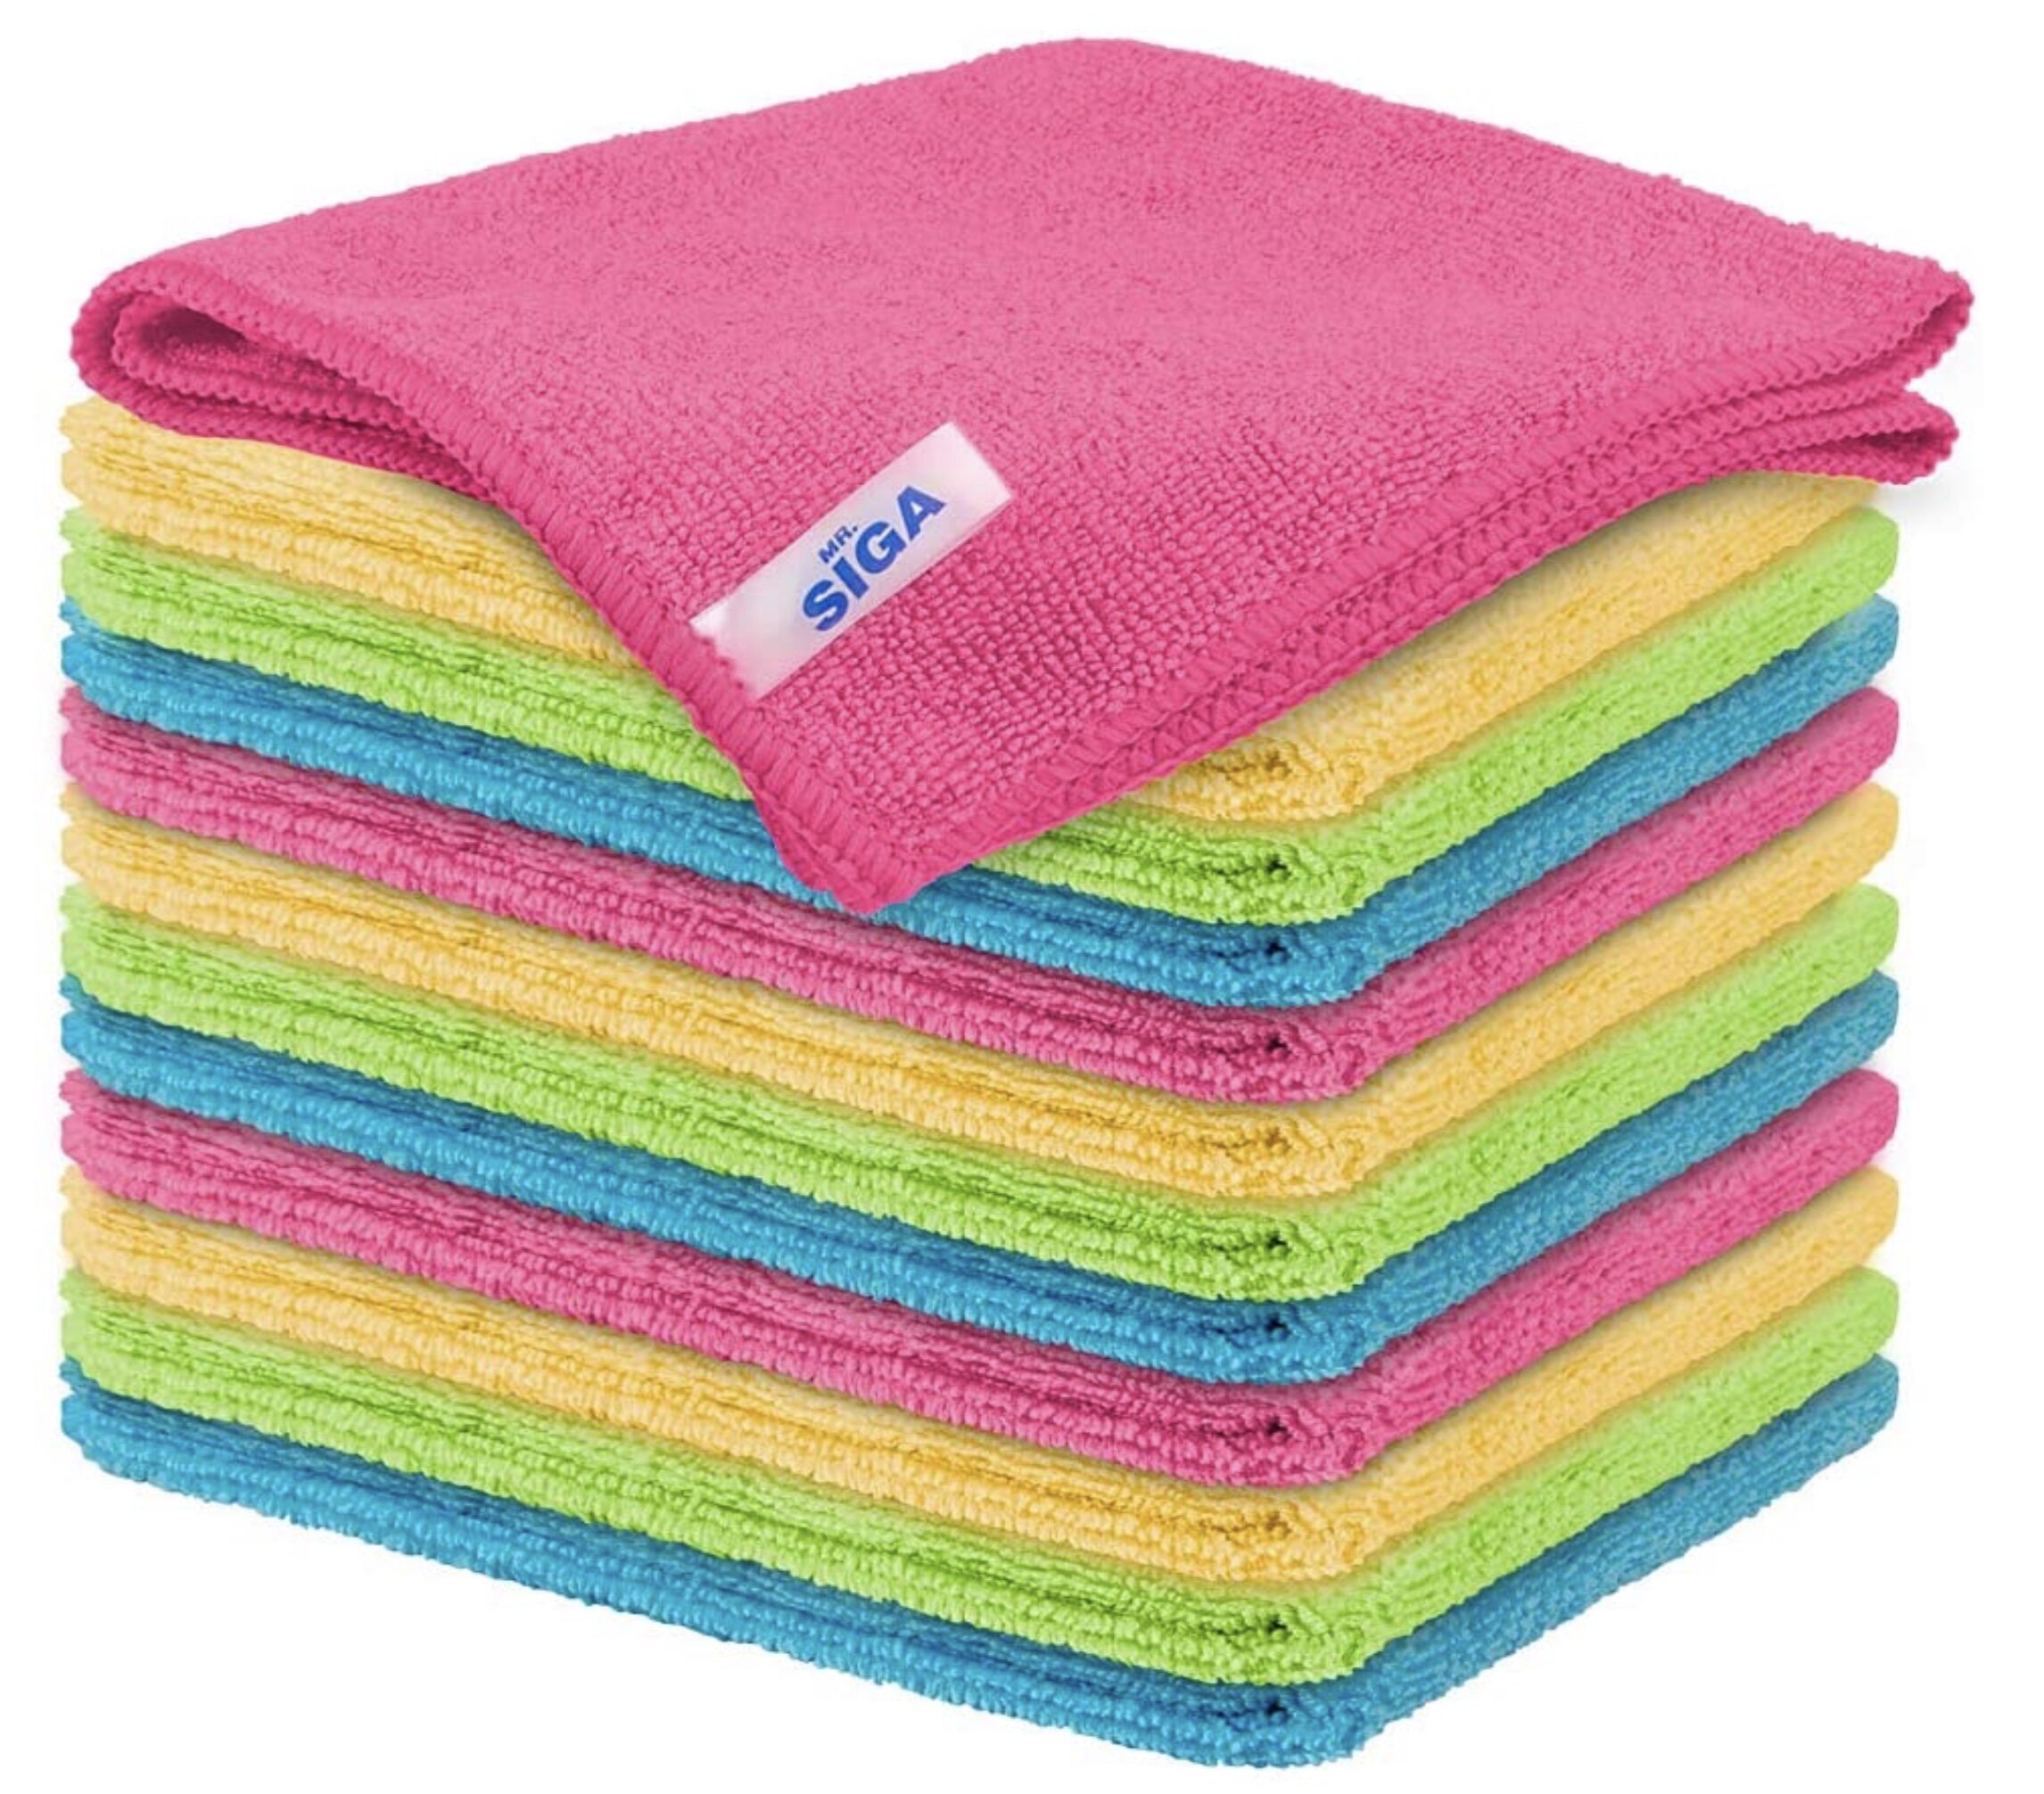 12pk microfibre cleaning cloths